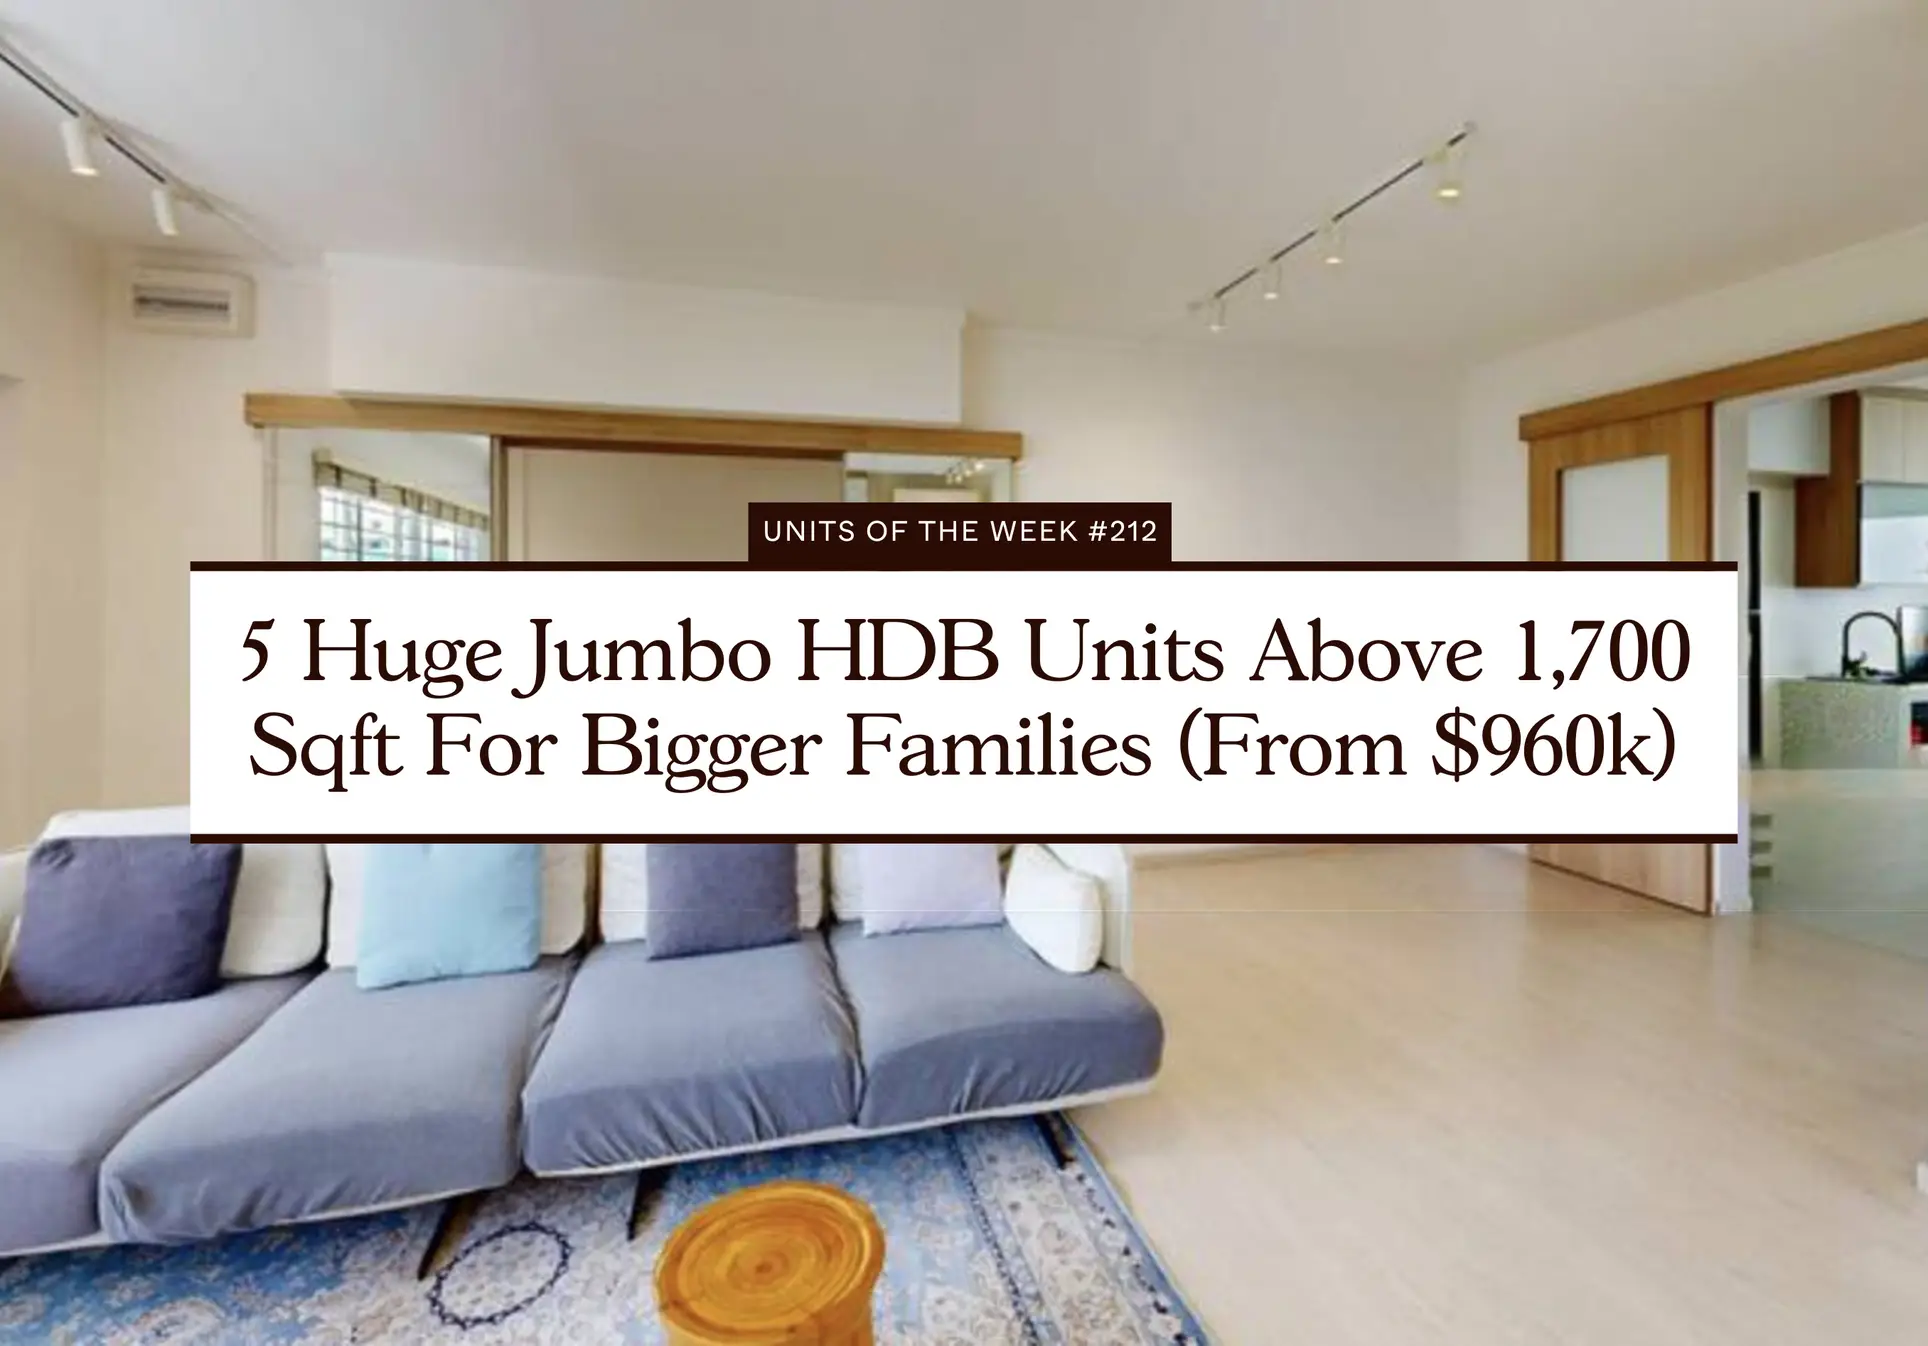 5 Huge Jumbo HDB Units Above 1700 Sqft For Bigger Families From 960k